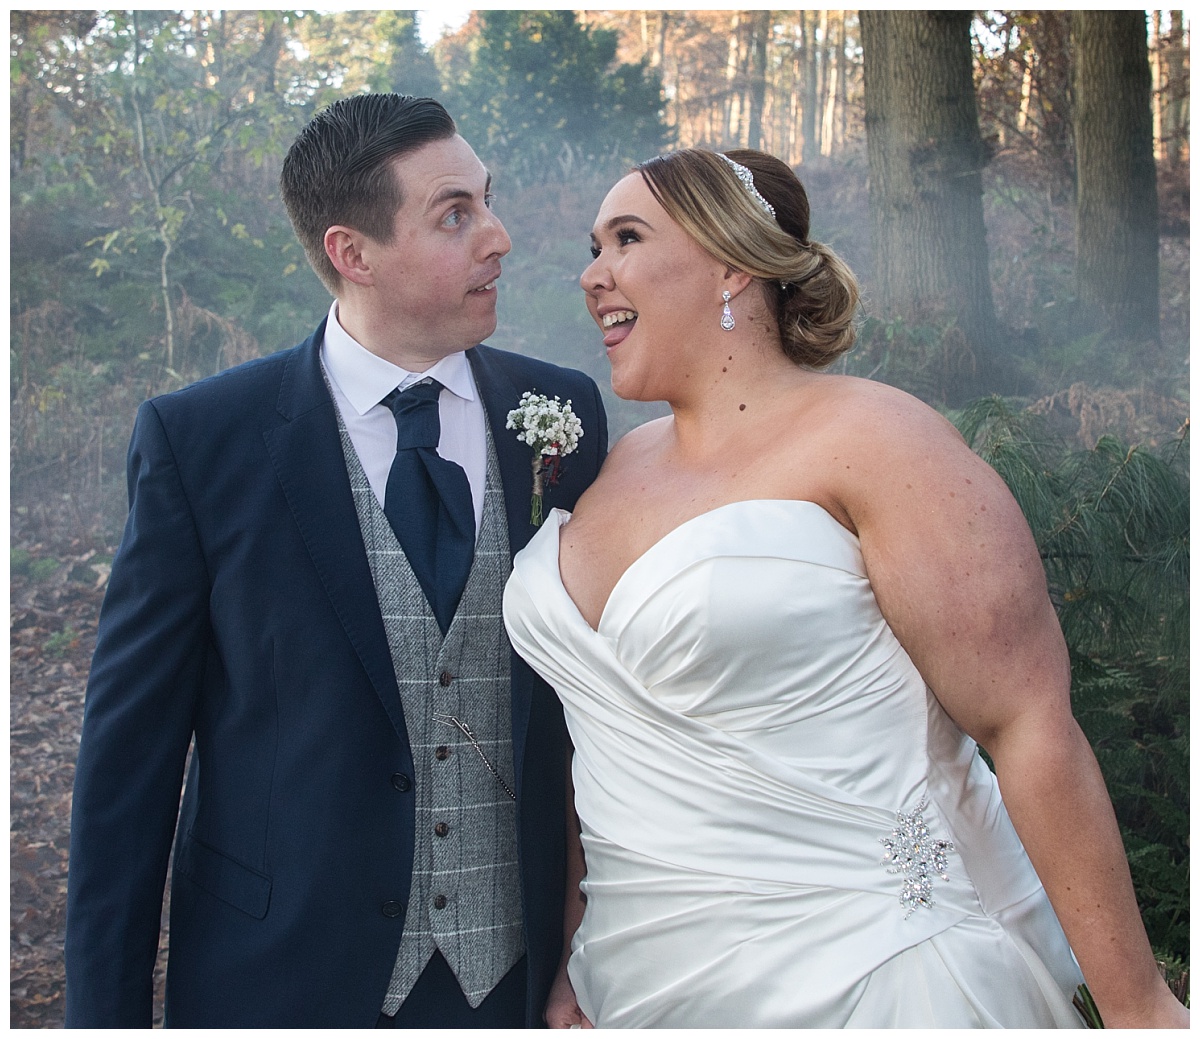 Wedding Photography Manchester - Lorna and Vinny's Abbeywood Estate and Gardens Wedding 71